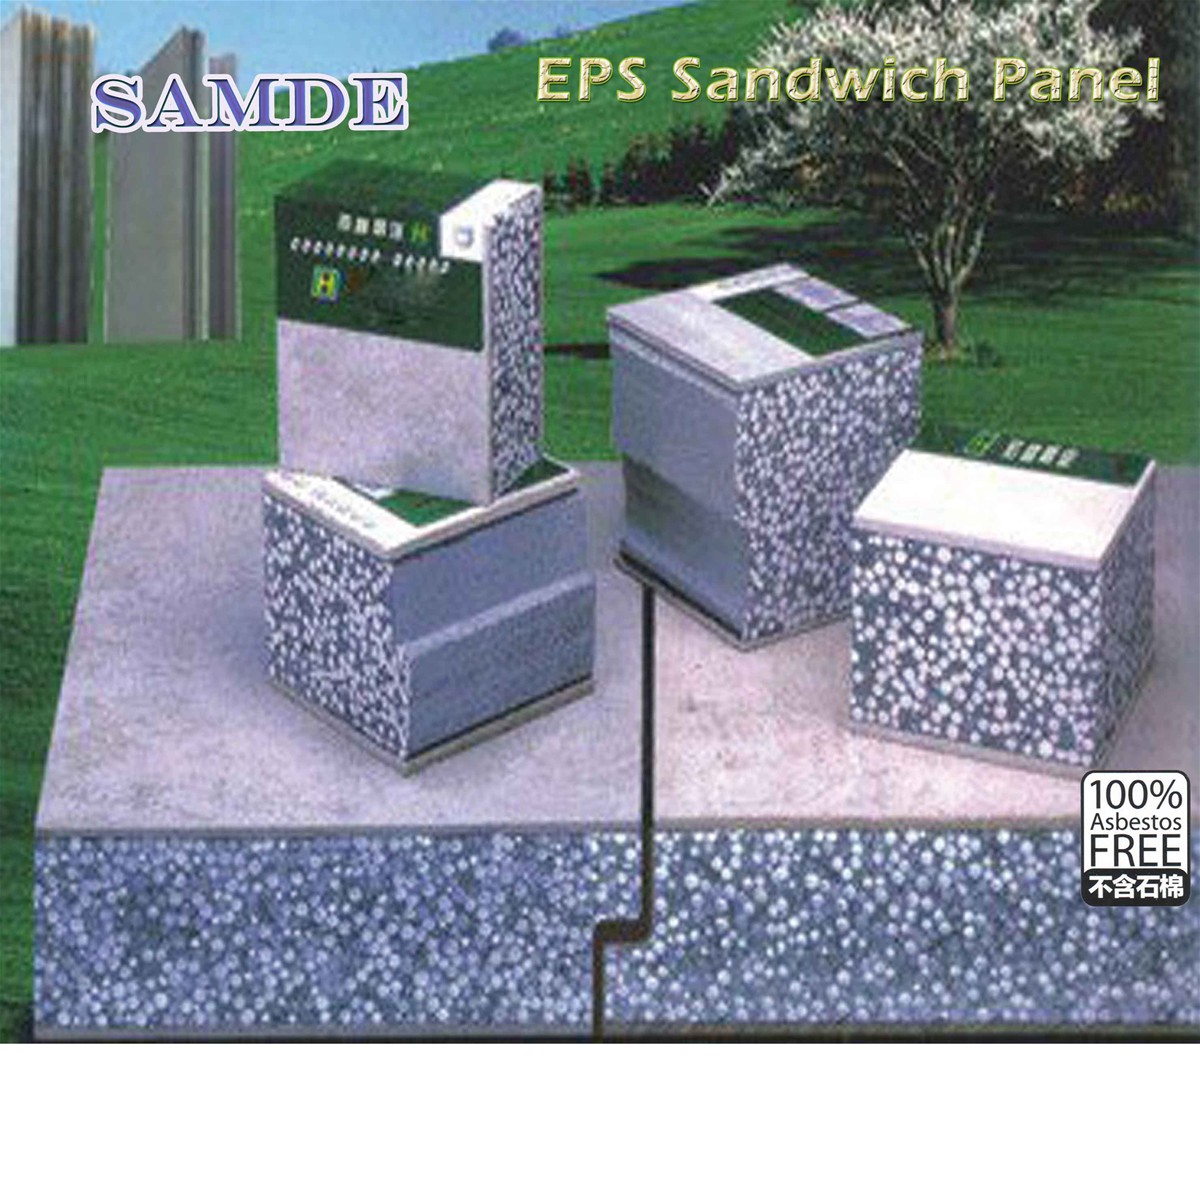 Construction materials companies fast construction sandwich panel indoor